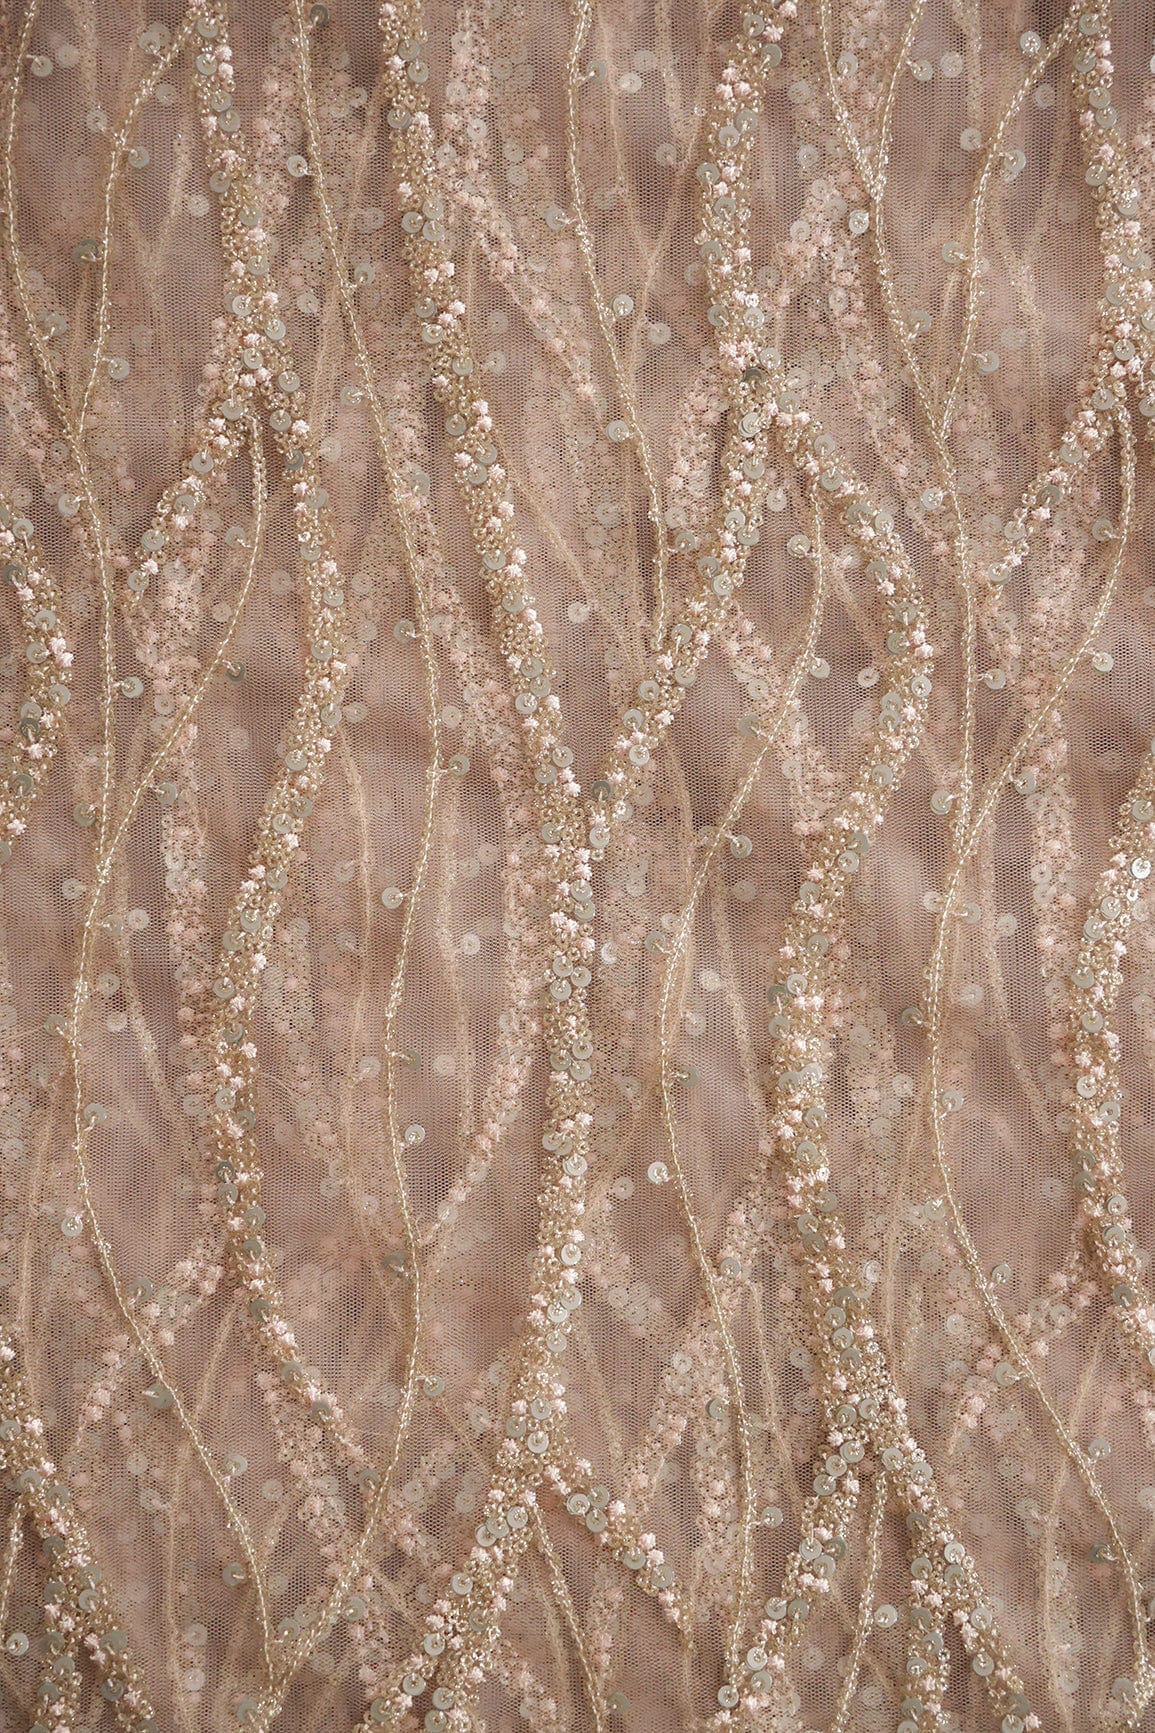 doeraa Embroidery Fabrics Gold And Silver Sequins With Peach Thread Embroidery on Peach Soft Net